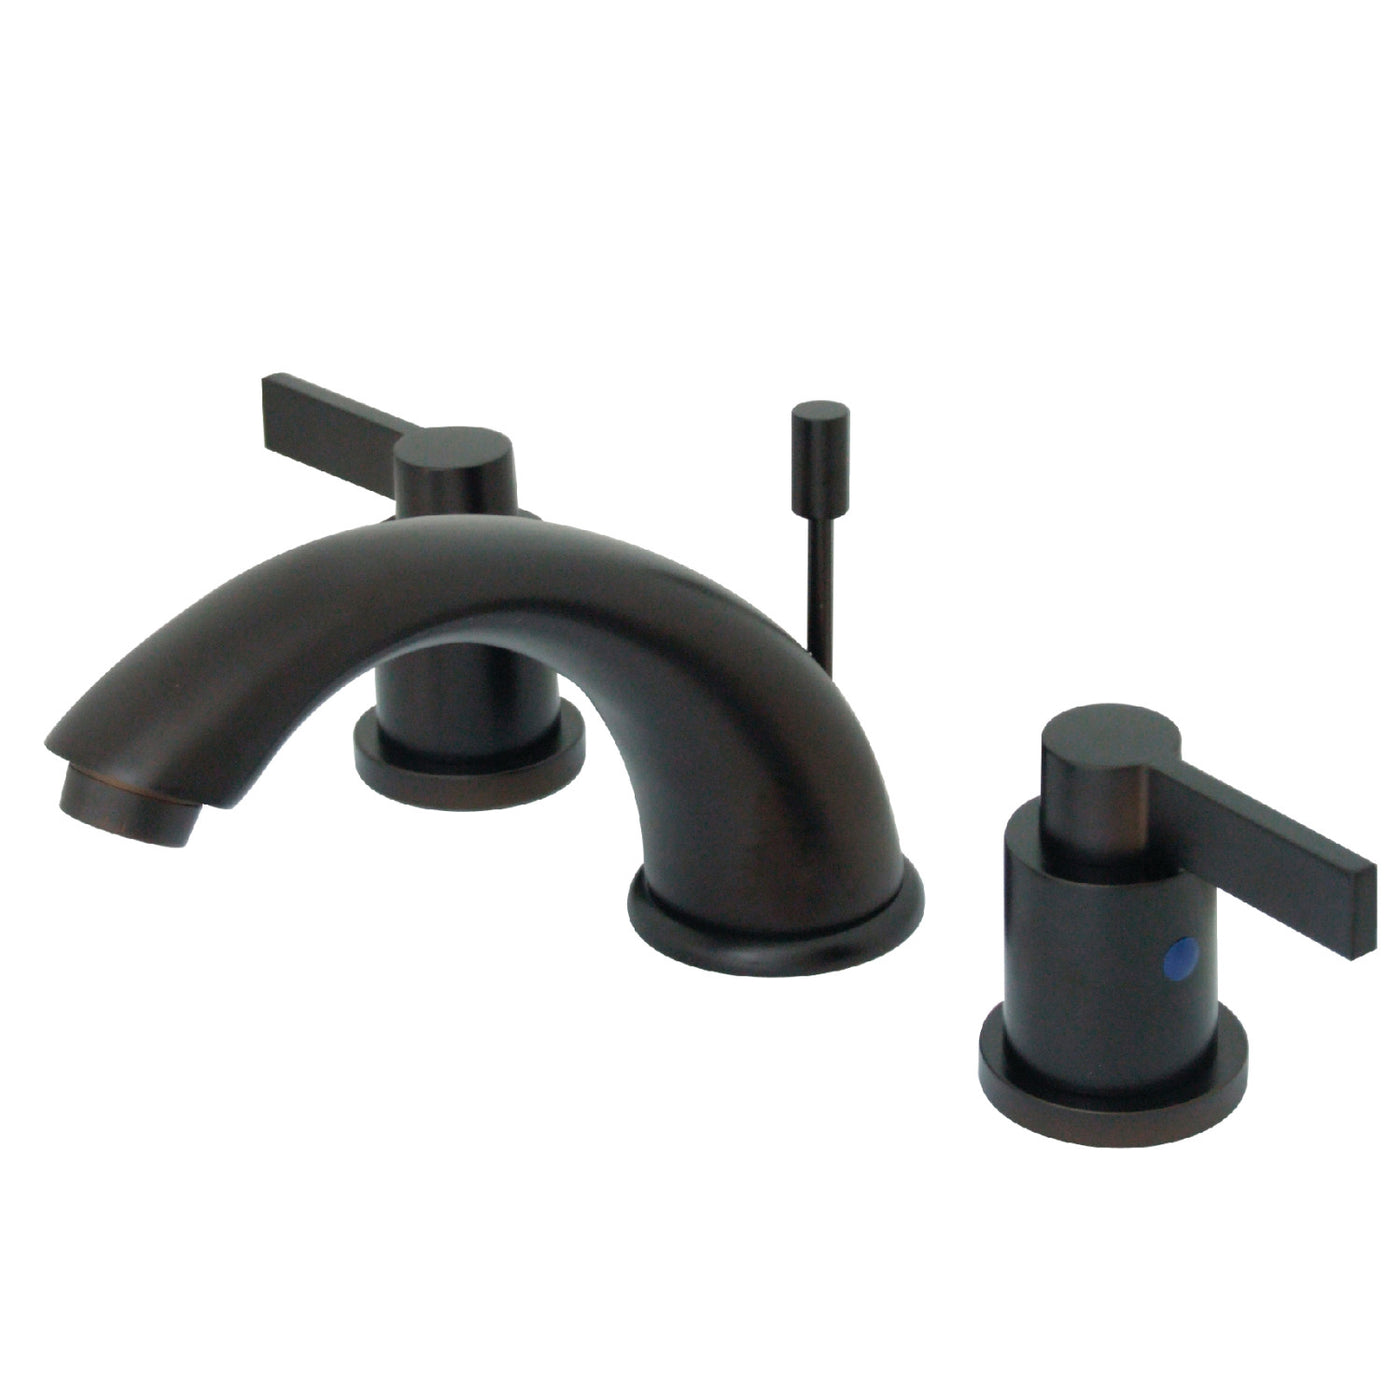 Elements of Design EB8965NDL Widespread Bathroom Faucet with Retail Pop-Up, Oil Rubbed Bronze